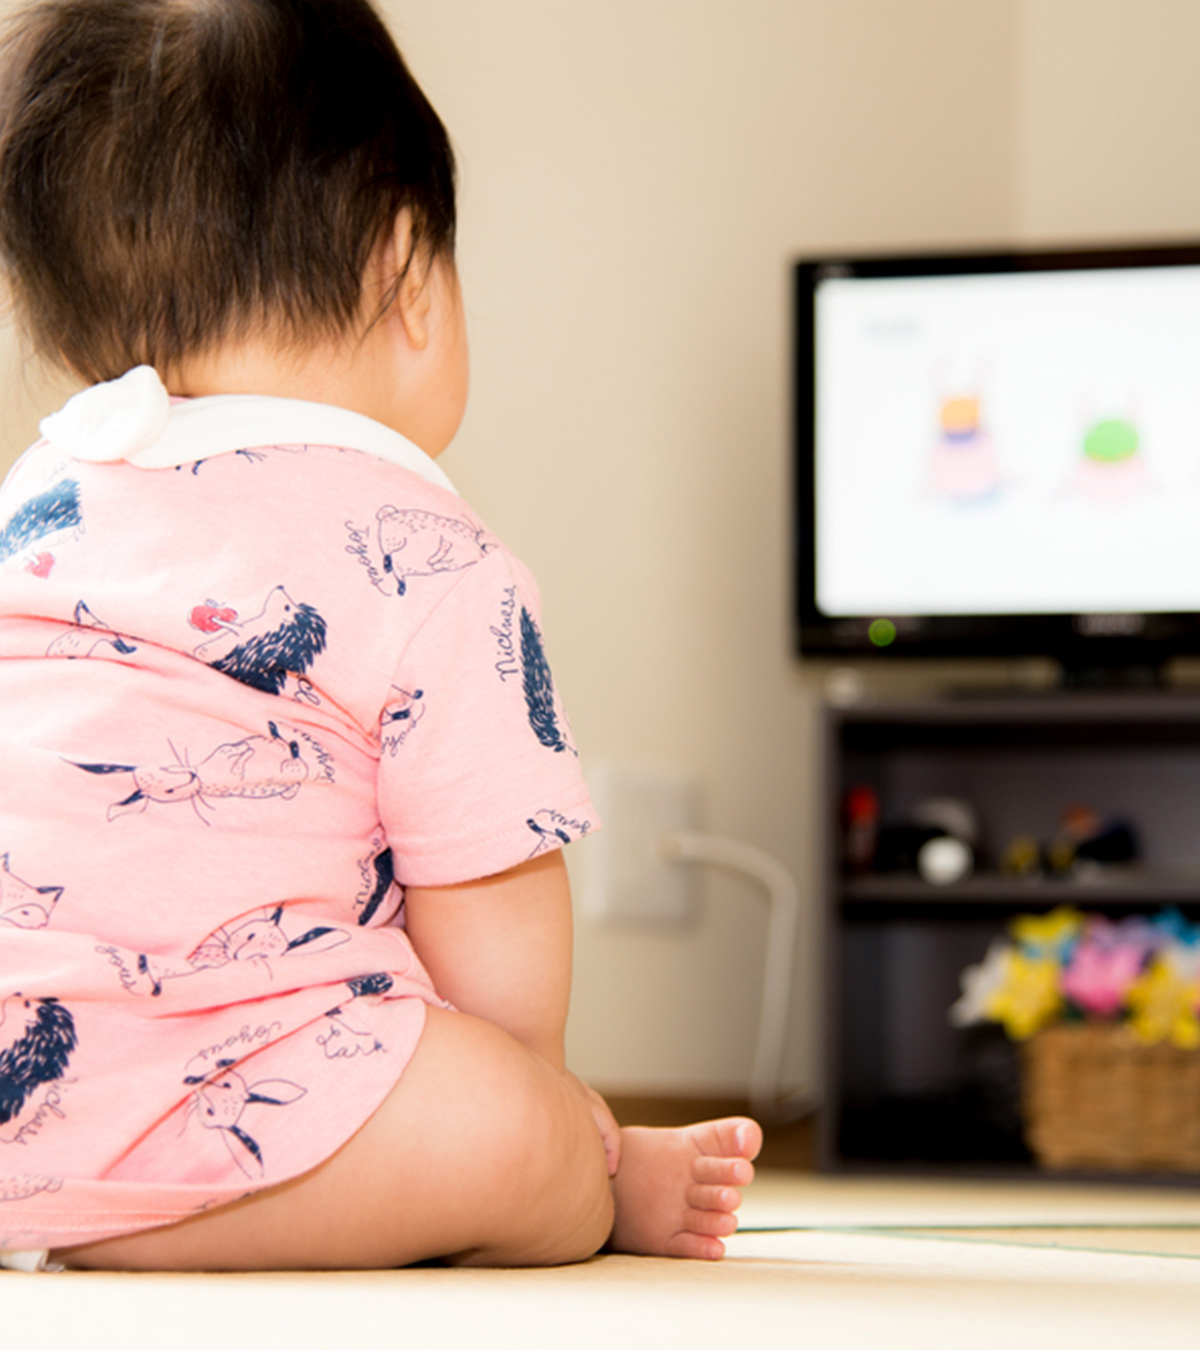 Babies Watching TV: Effects, And Alternatives